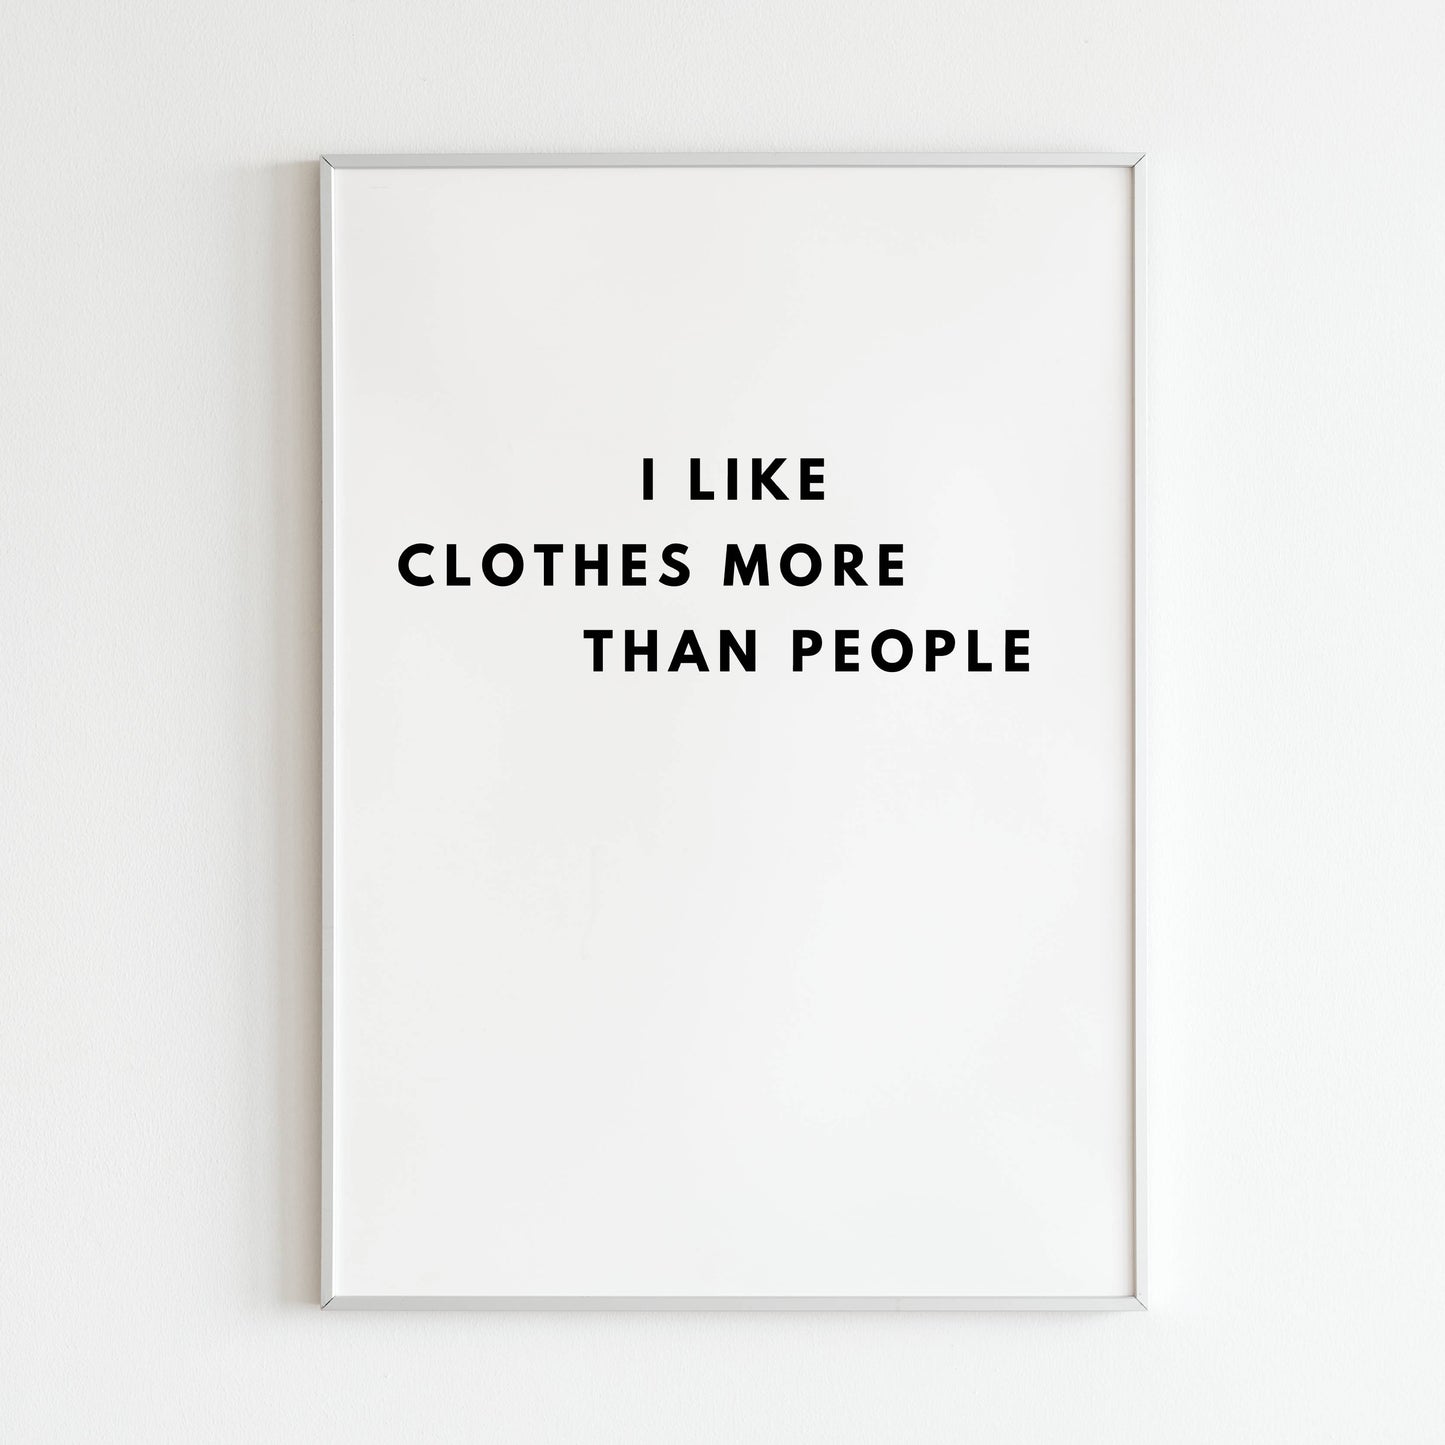 Downloadable "I likes clothes more than people" art print, express your love for fashion with a touch of humor.